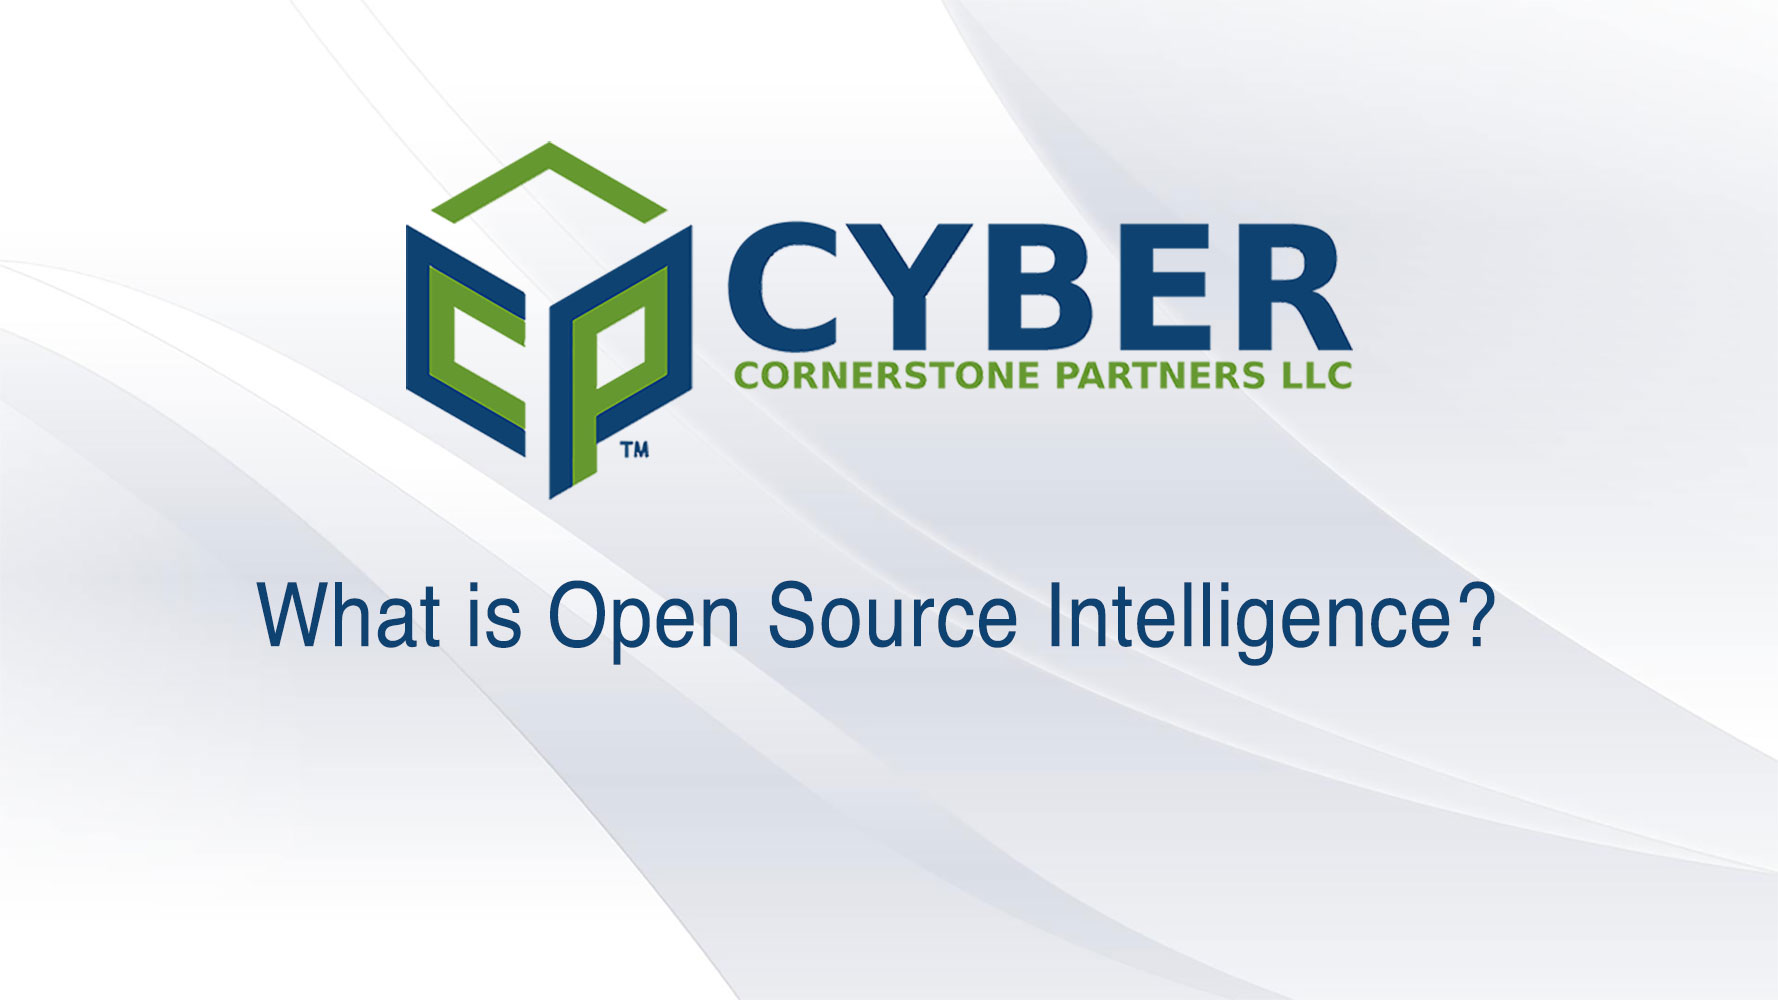 Open Source Intelligence CP Cyber Security Consulting and Solutions Firm Denver Colorado